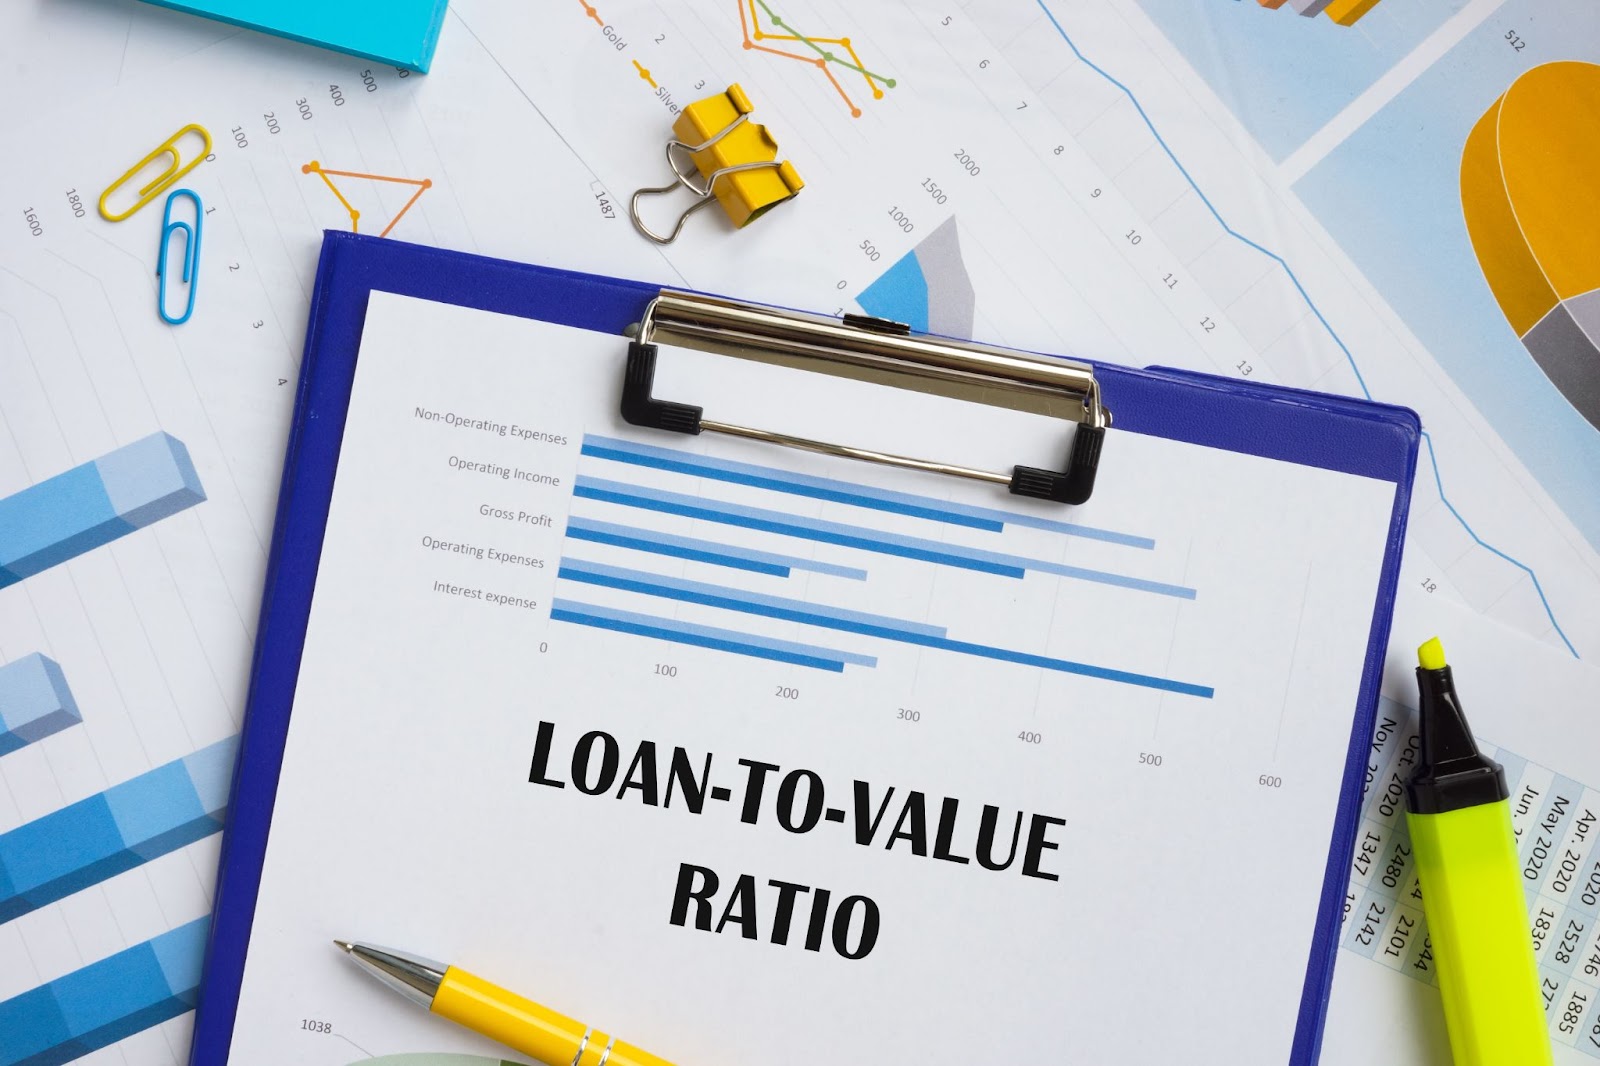 Clipboard with a piece of paper that says “loan to value ratio